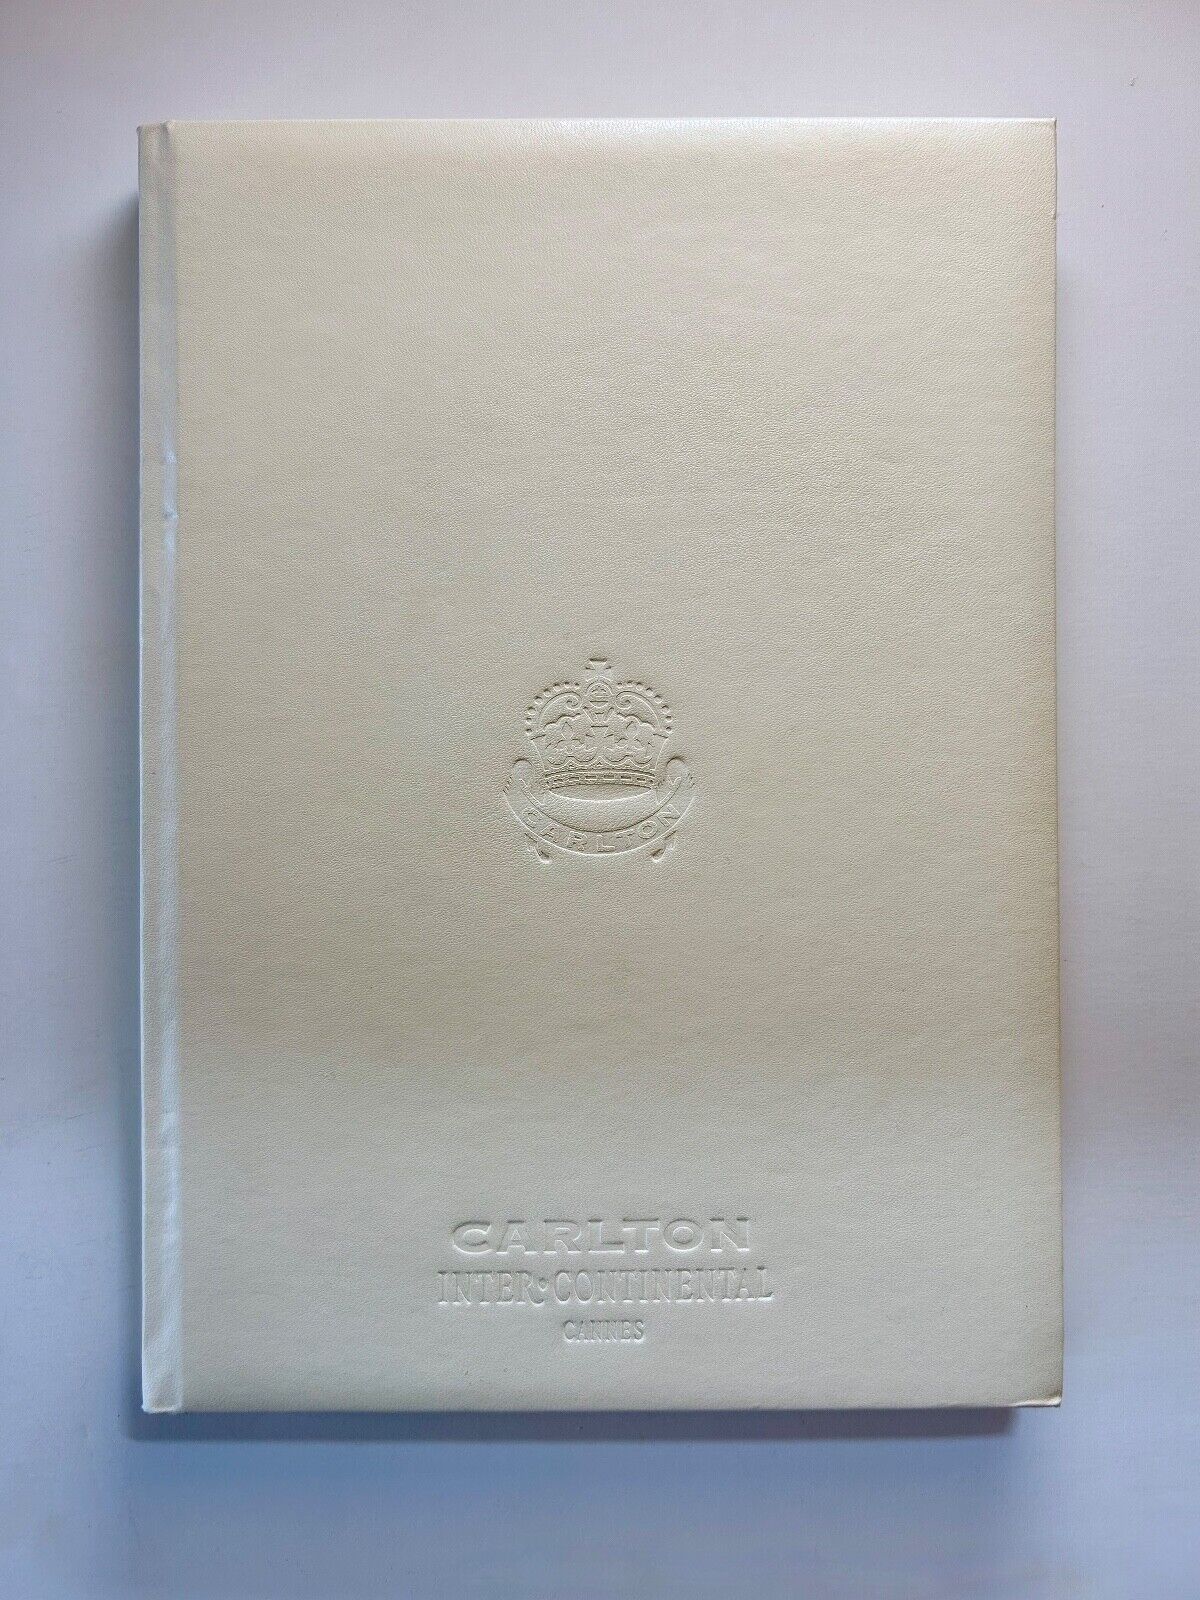 Carlton Inter-Continental Cannes Hotel Book - RARE 1993 Vintage History Luxury